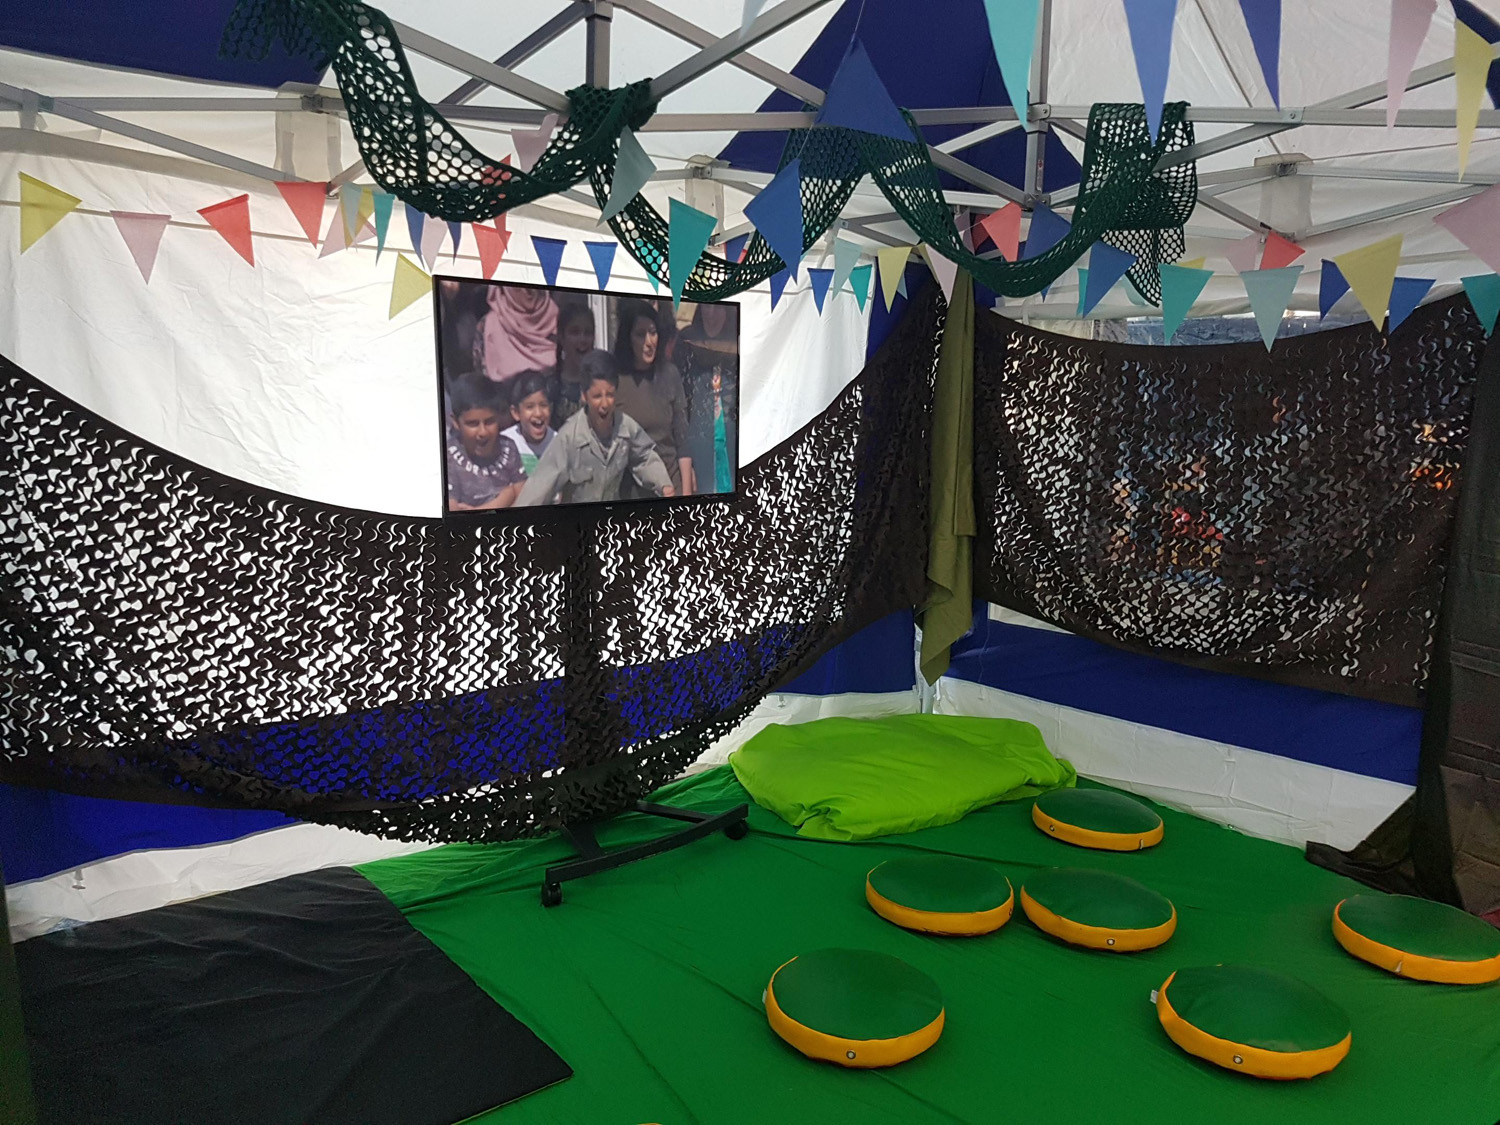 One of the dens you can explore as part of The Dengineers Half Term